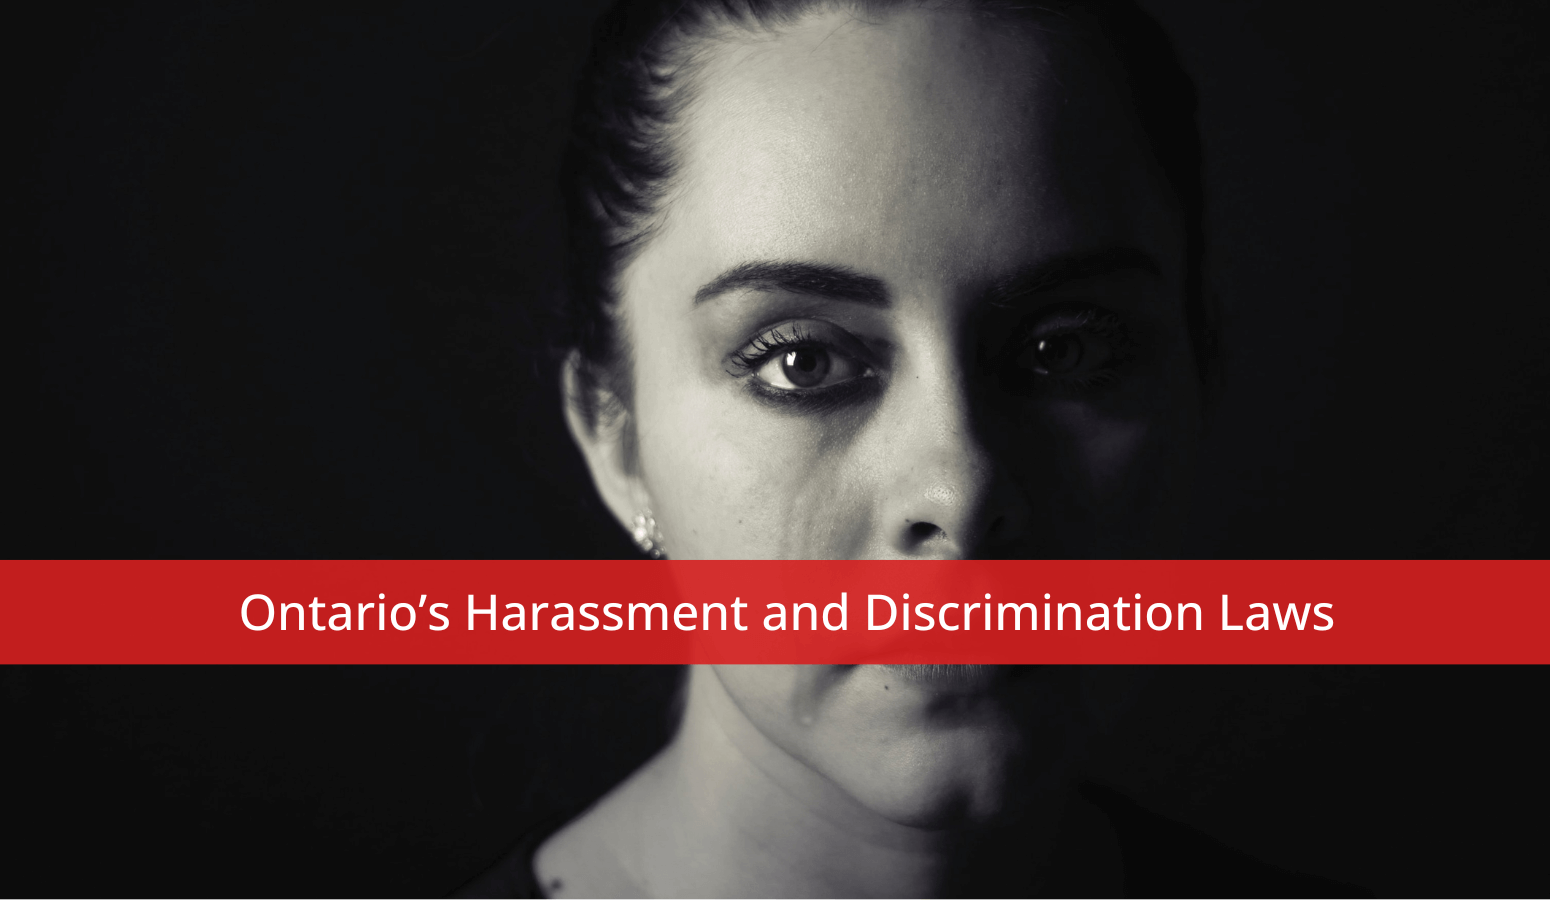 Featured image for “Ontario’s Harassment and Discrimination Laws”